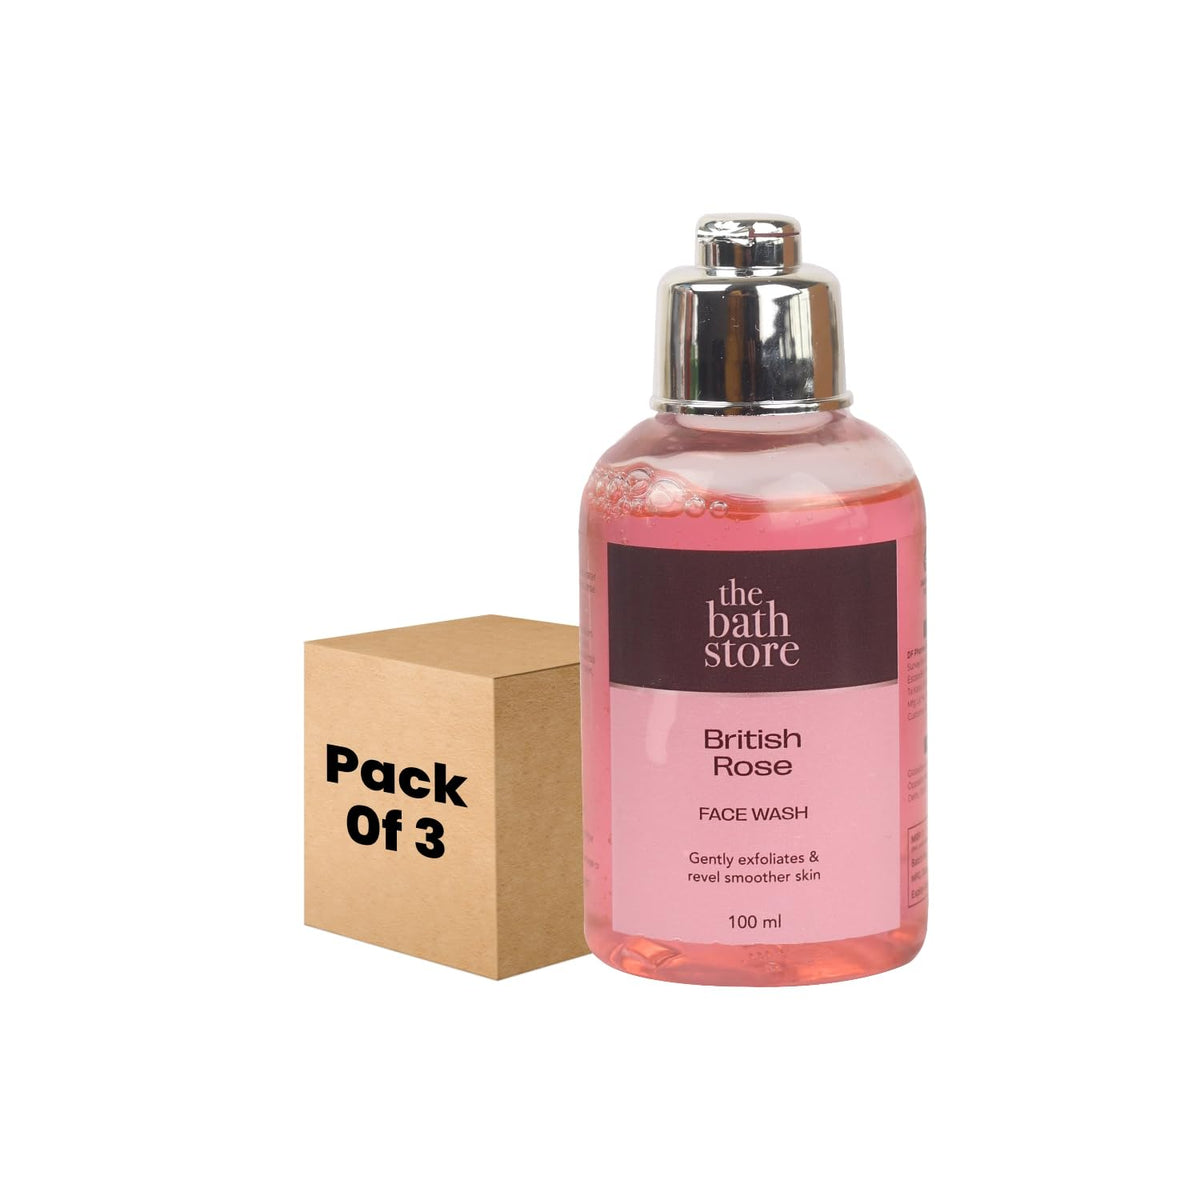 The Bath Store British Rose Face Wash - Gentle Exfoliation | Deep Cleansing - 100ml (Pack of 3)